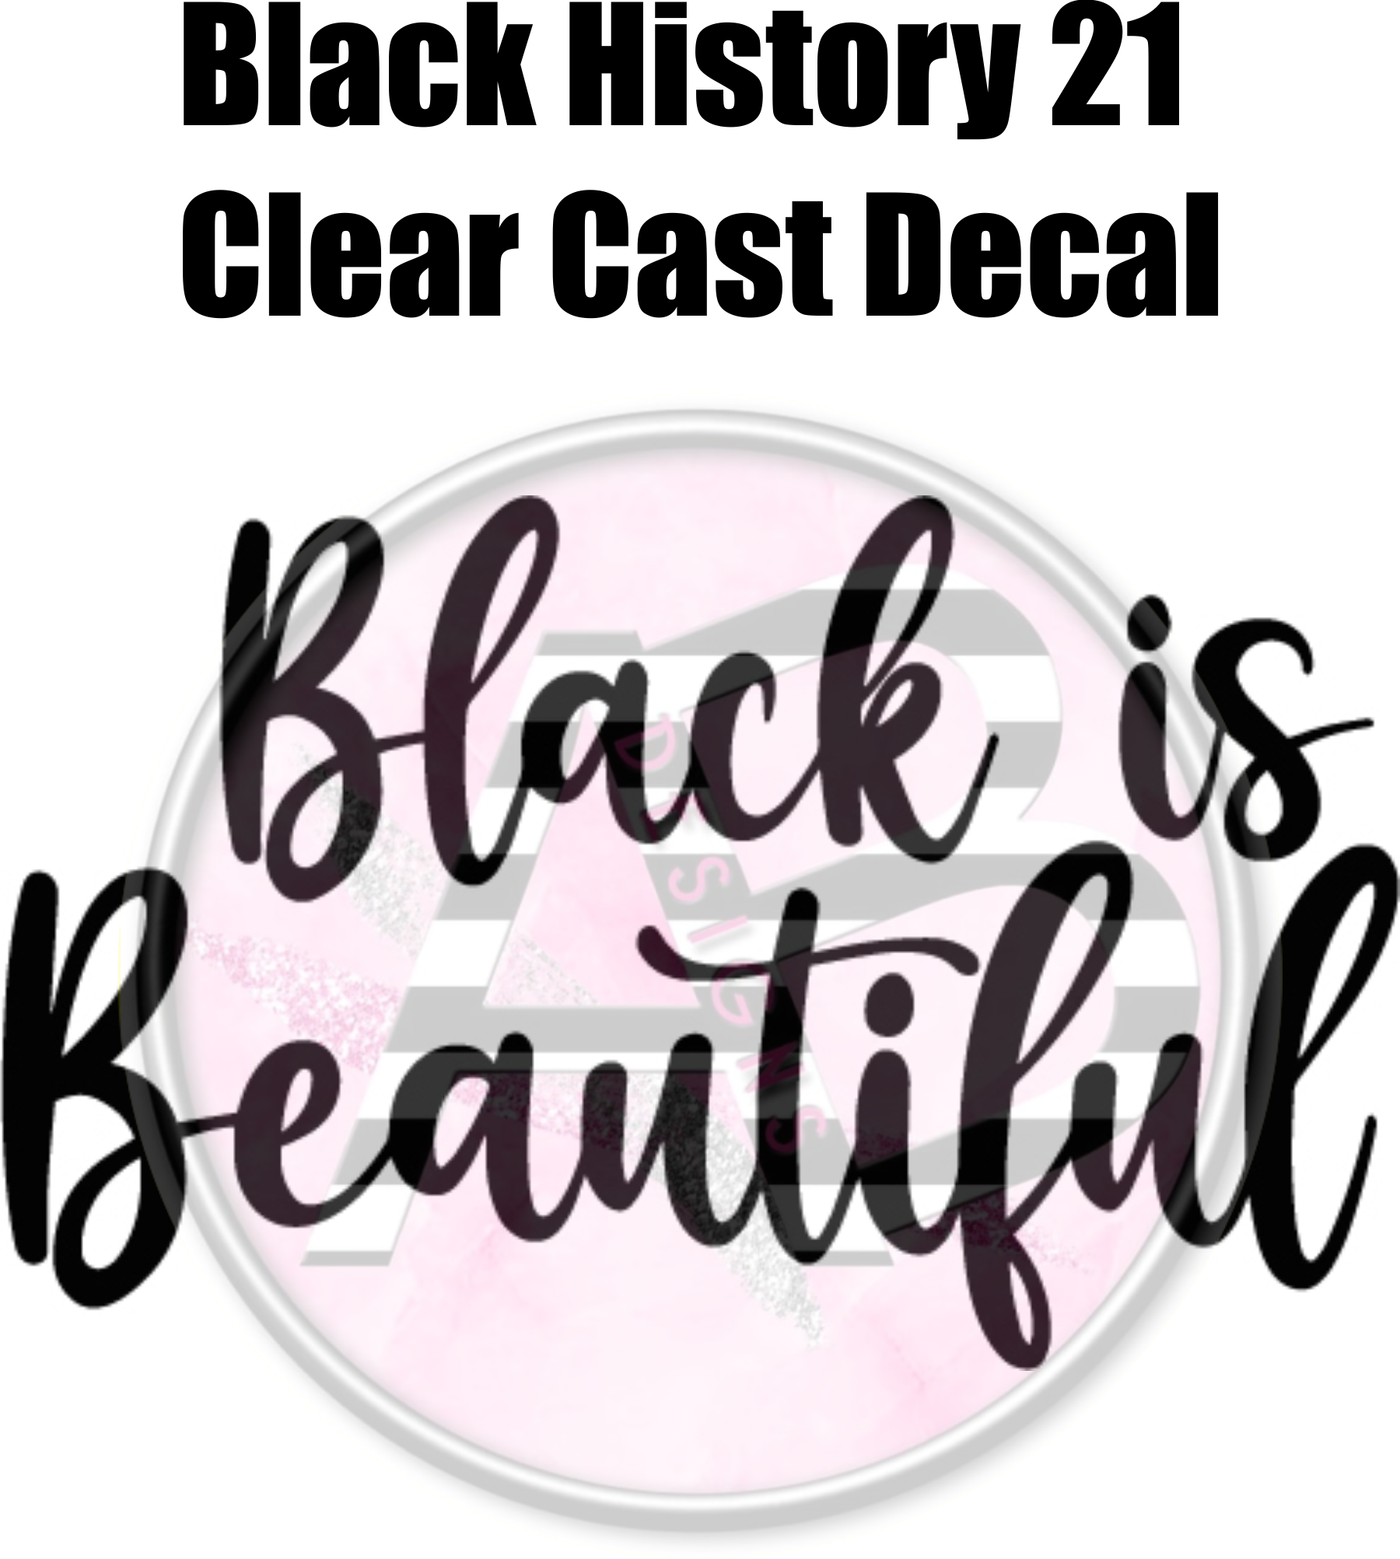 Black History 21 - Clear Cast Decal